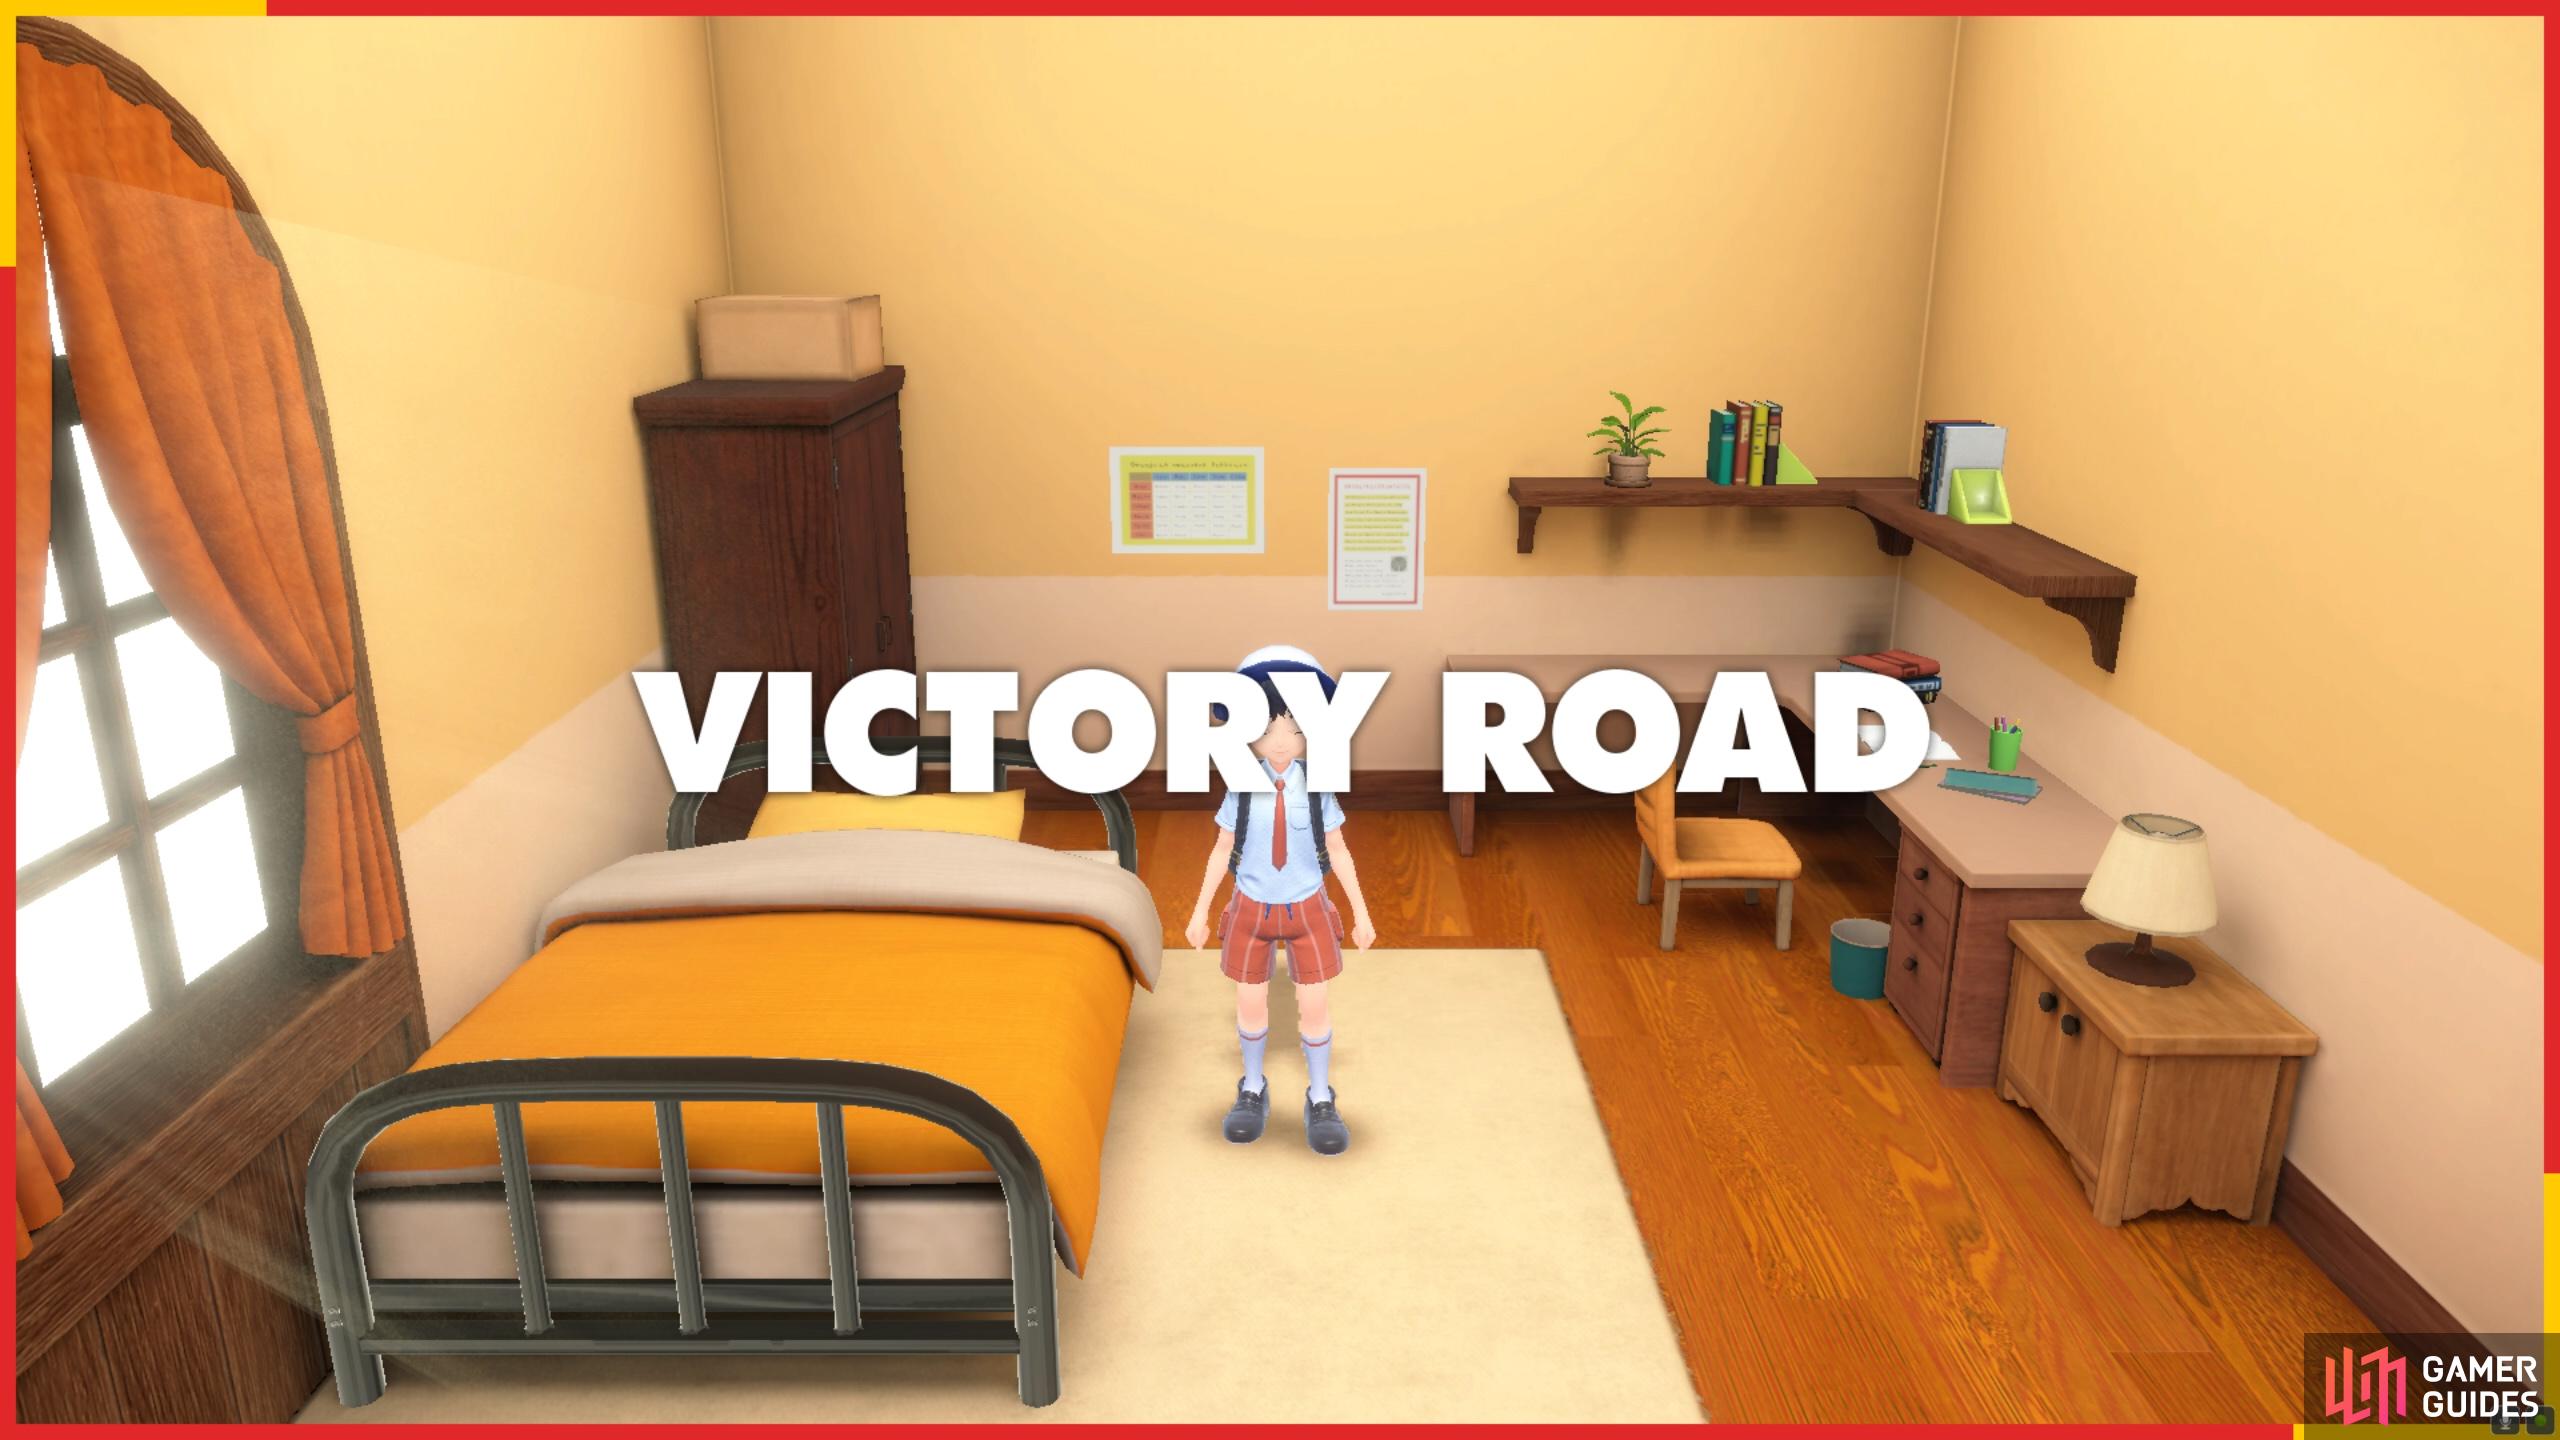 This marks the end of Victory Road.